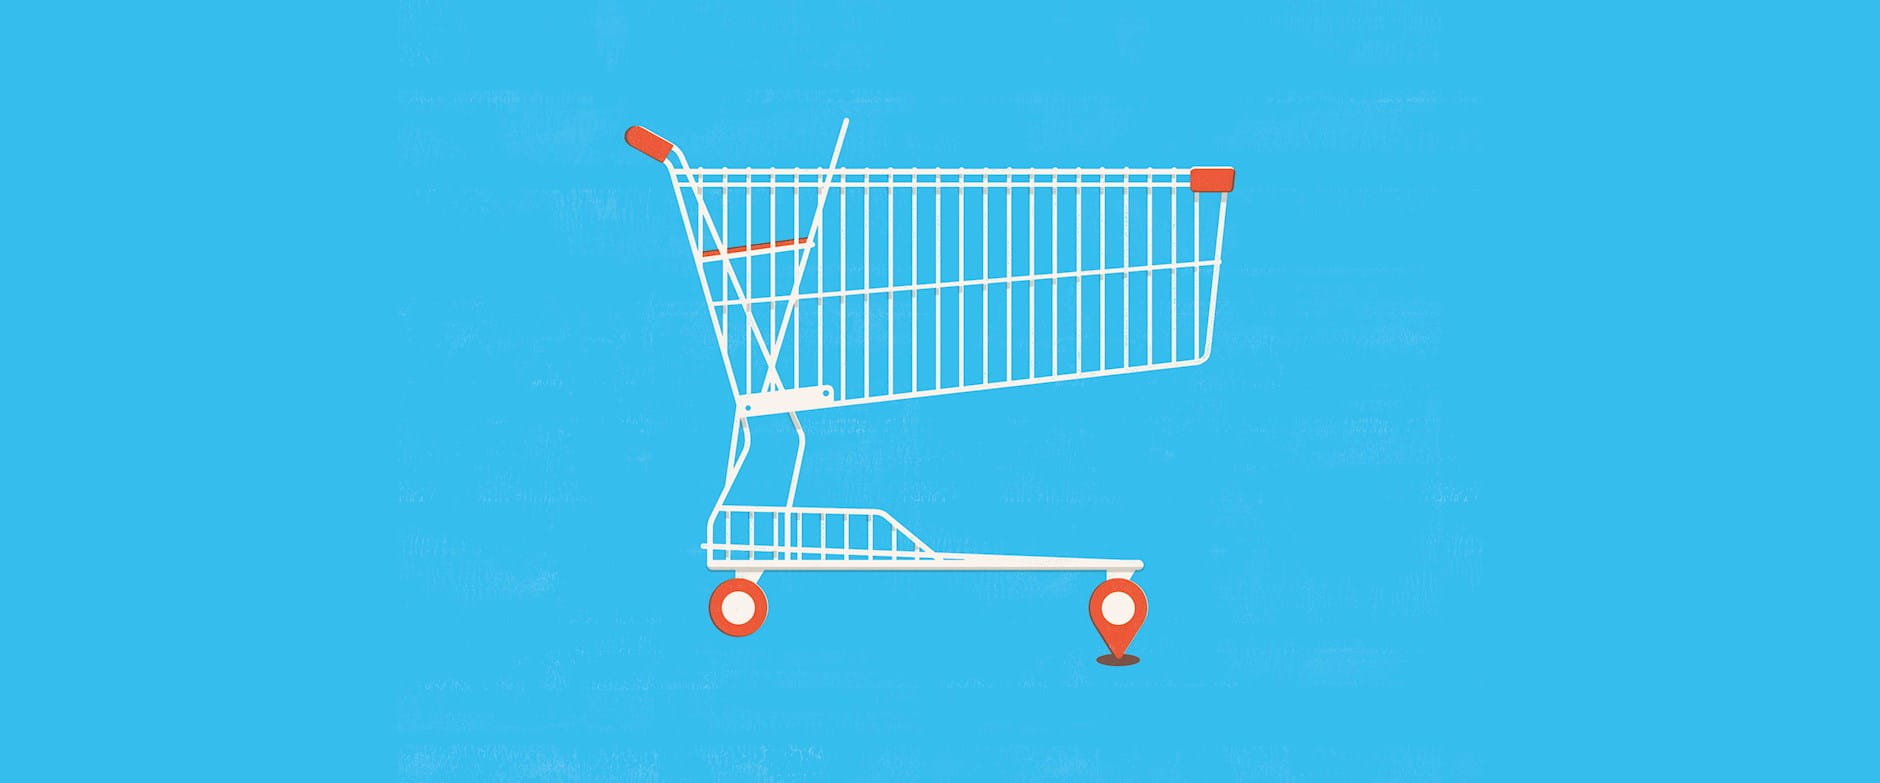 Illustration of a shopping cart whose wheel looks like a location symbol